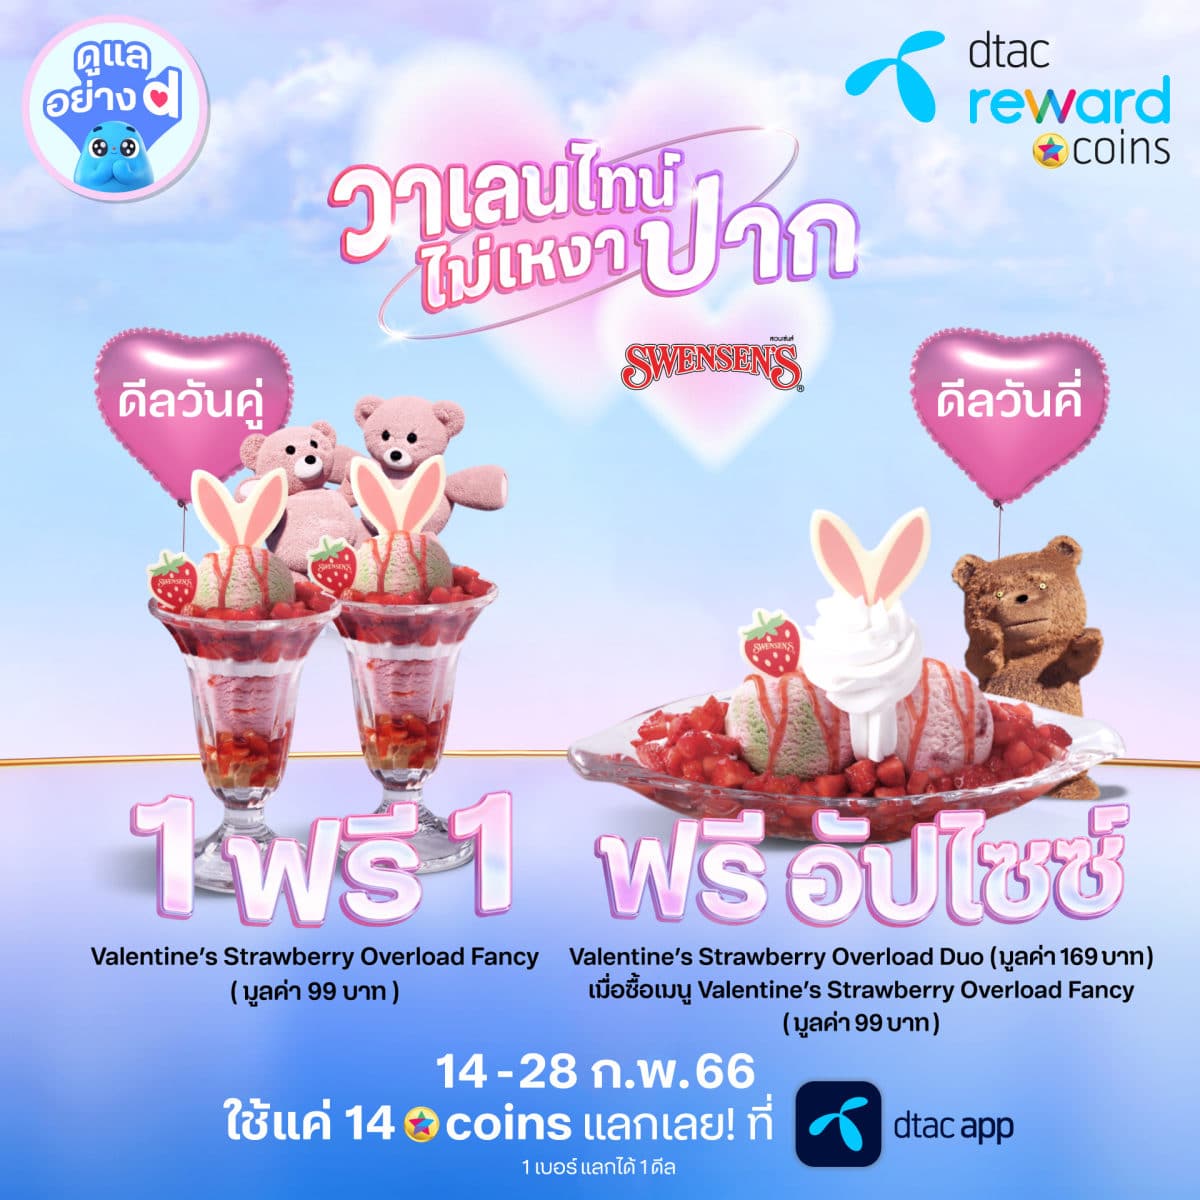 dtac Sweet Deals Every Odd and Even Day Valentine 